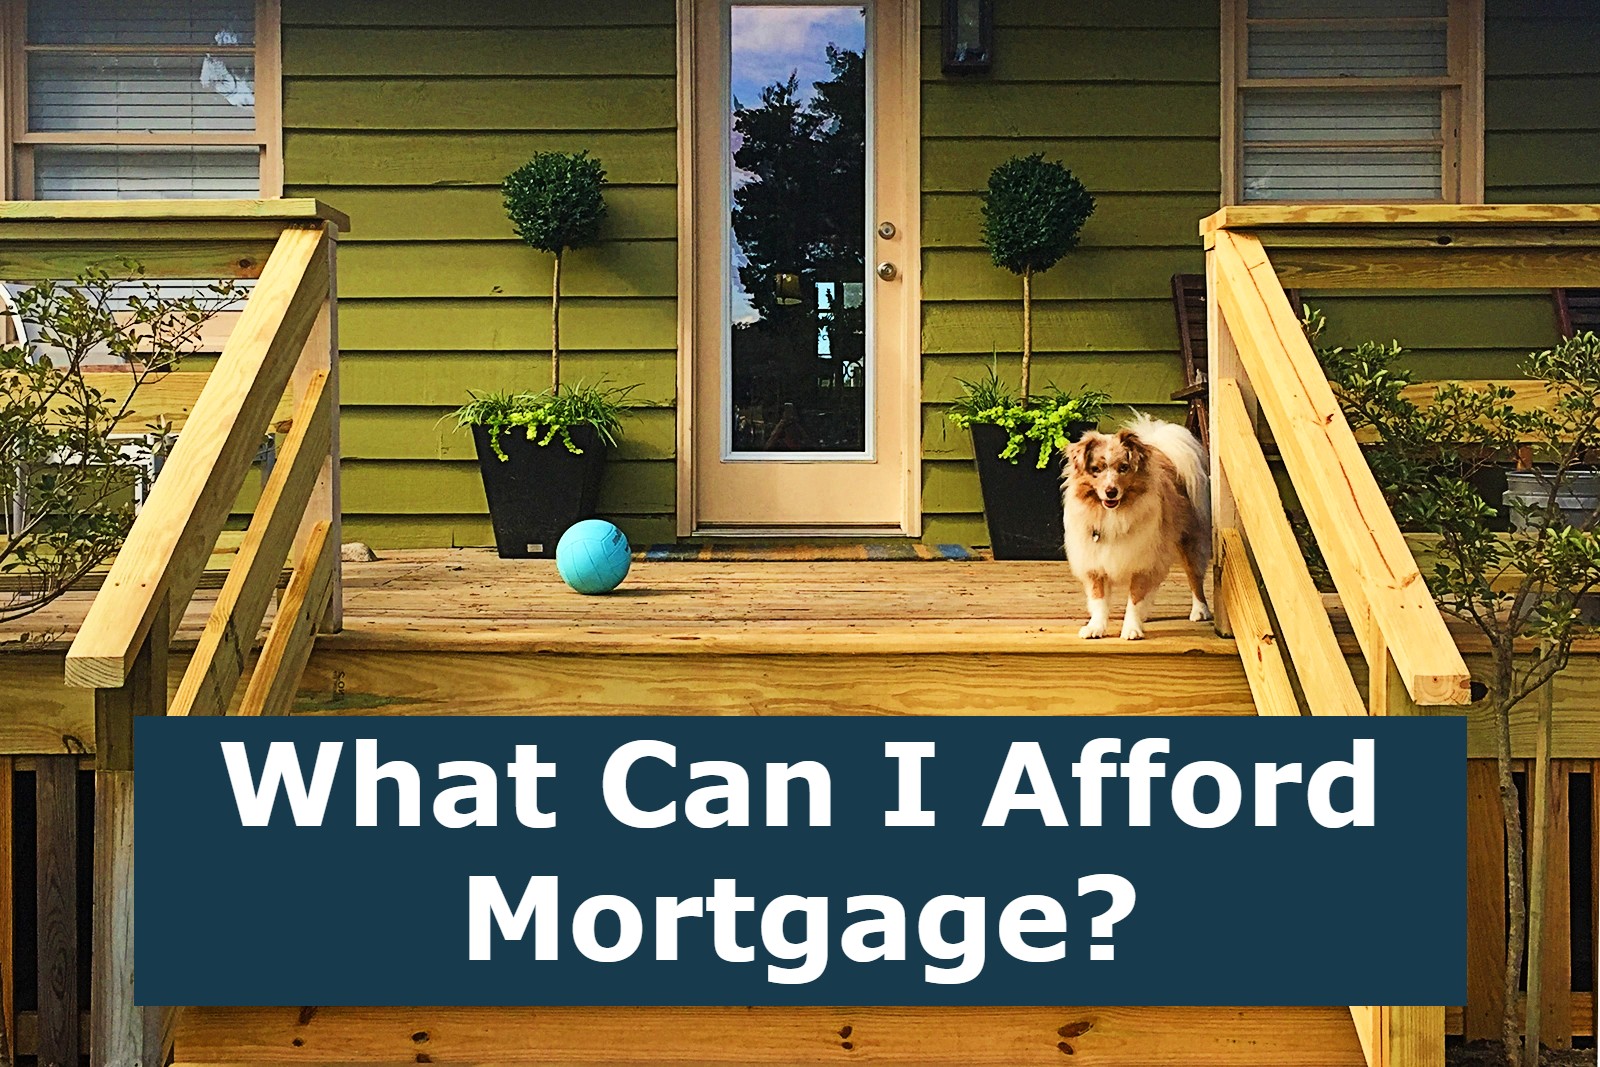 What Can I Afford Mortgage?